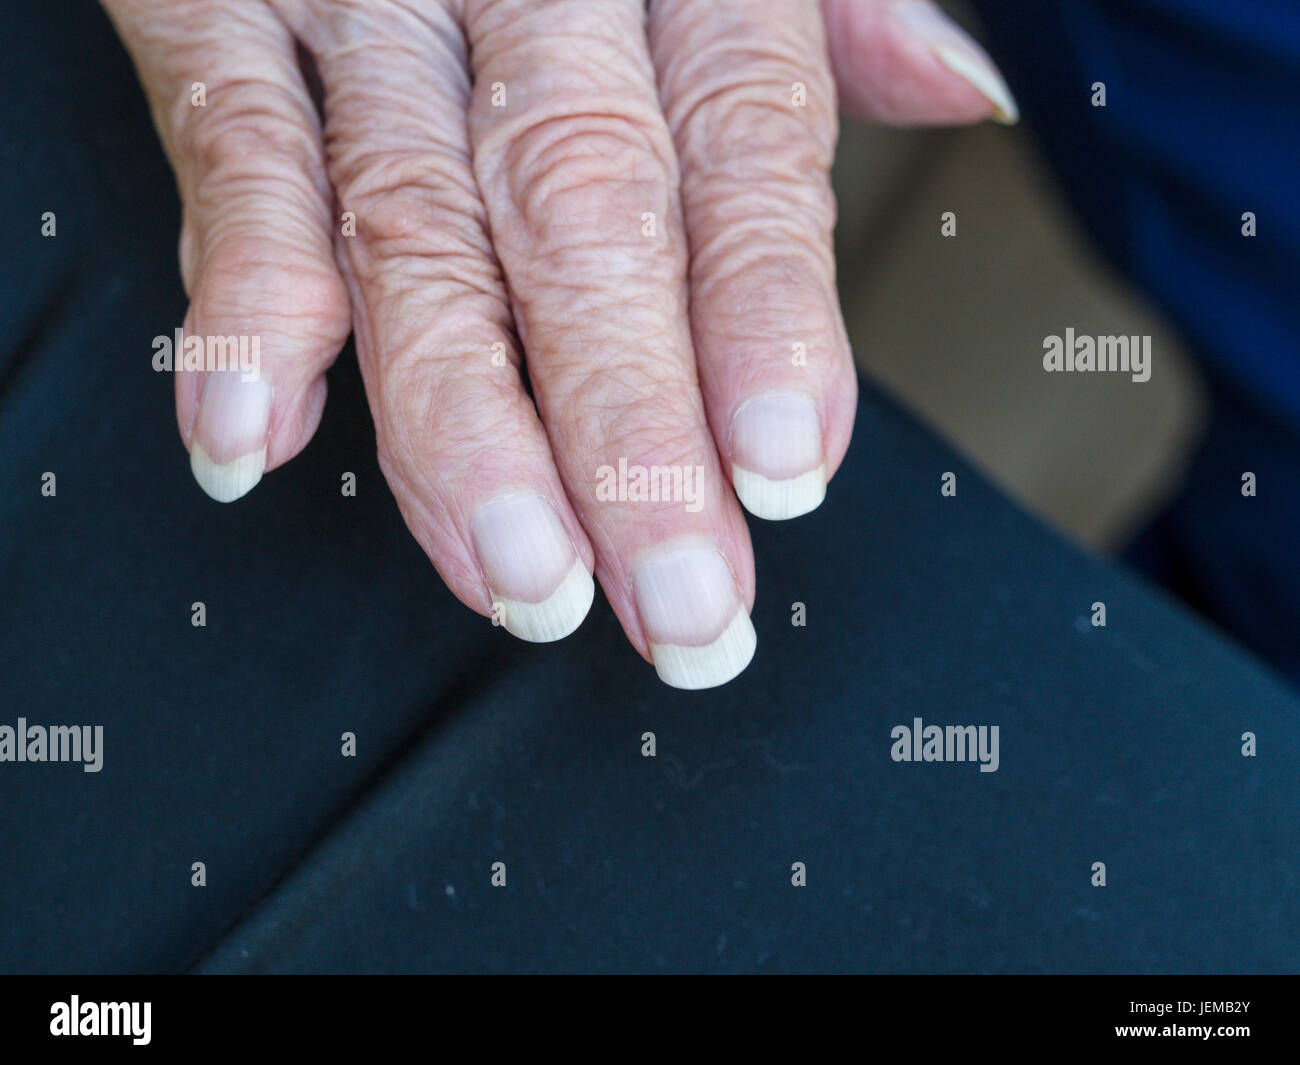 Arthritic wrinkled hand of an eldery woman: The right hand with long nails and misshapen fingers of an old woman. Stock Photo